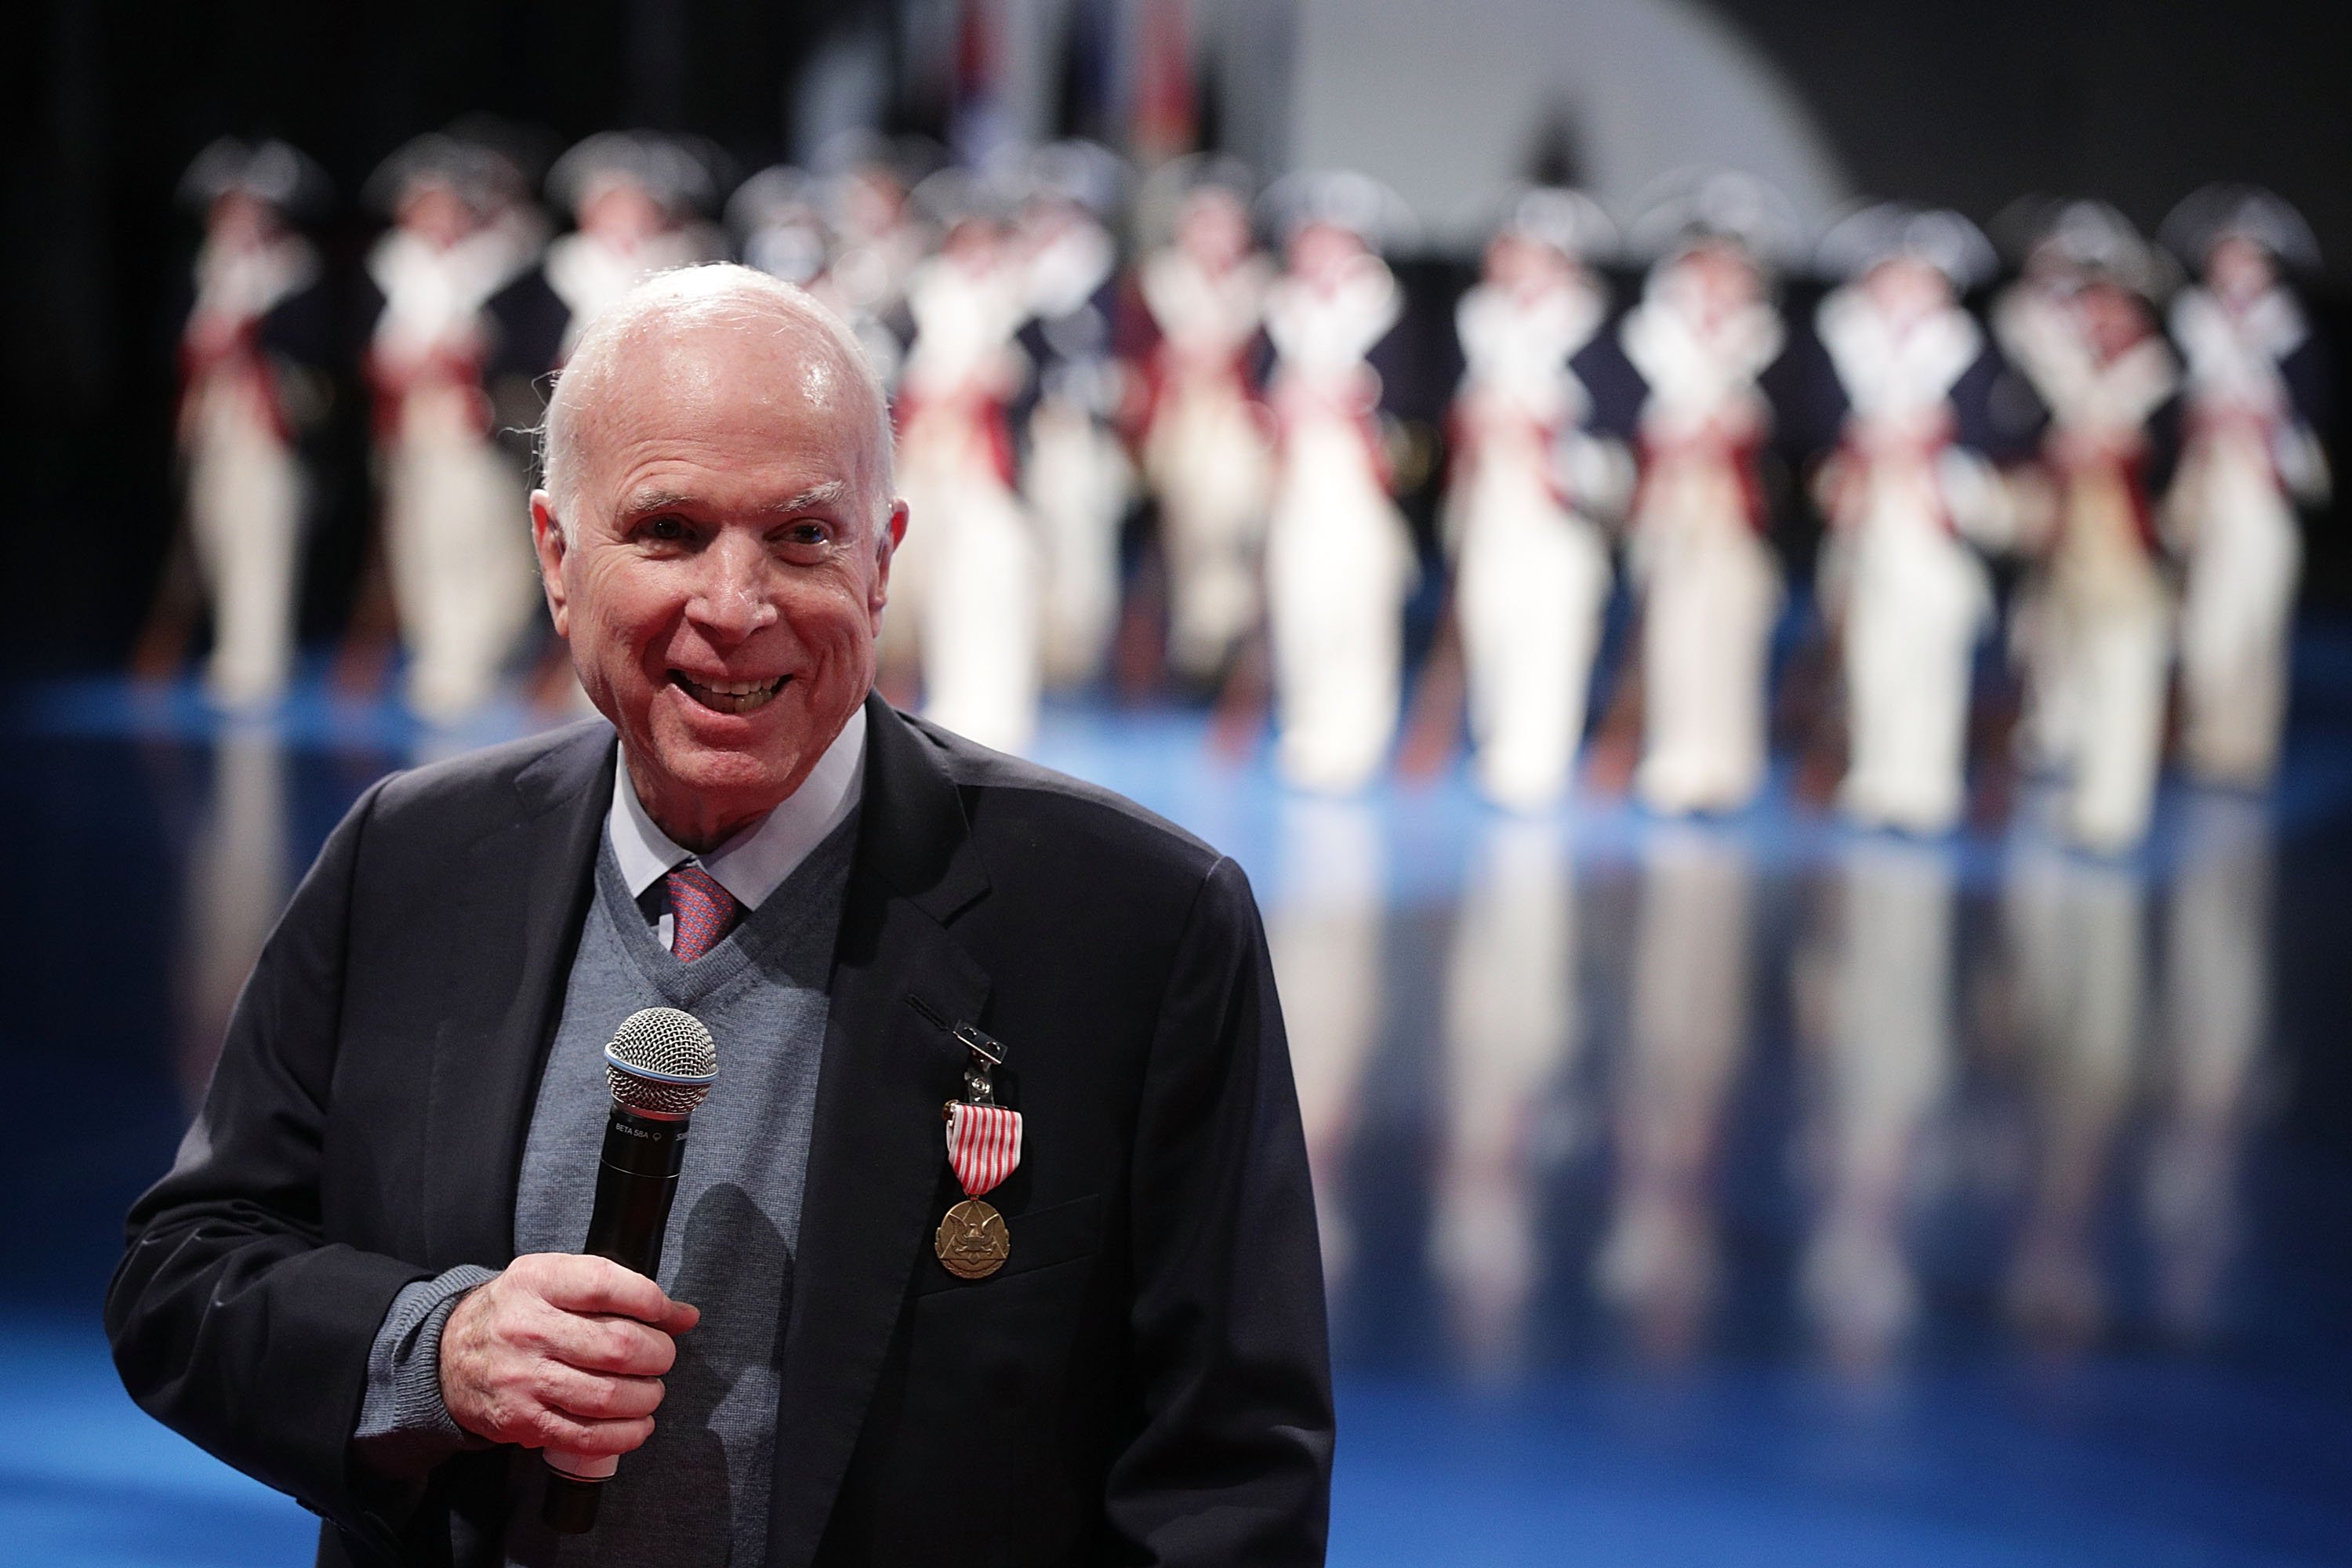 Late sen. John McCain after receiving a Civilian Service Medal. | Source: Getty Images